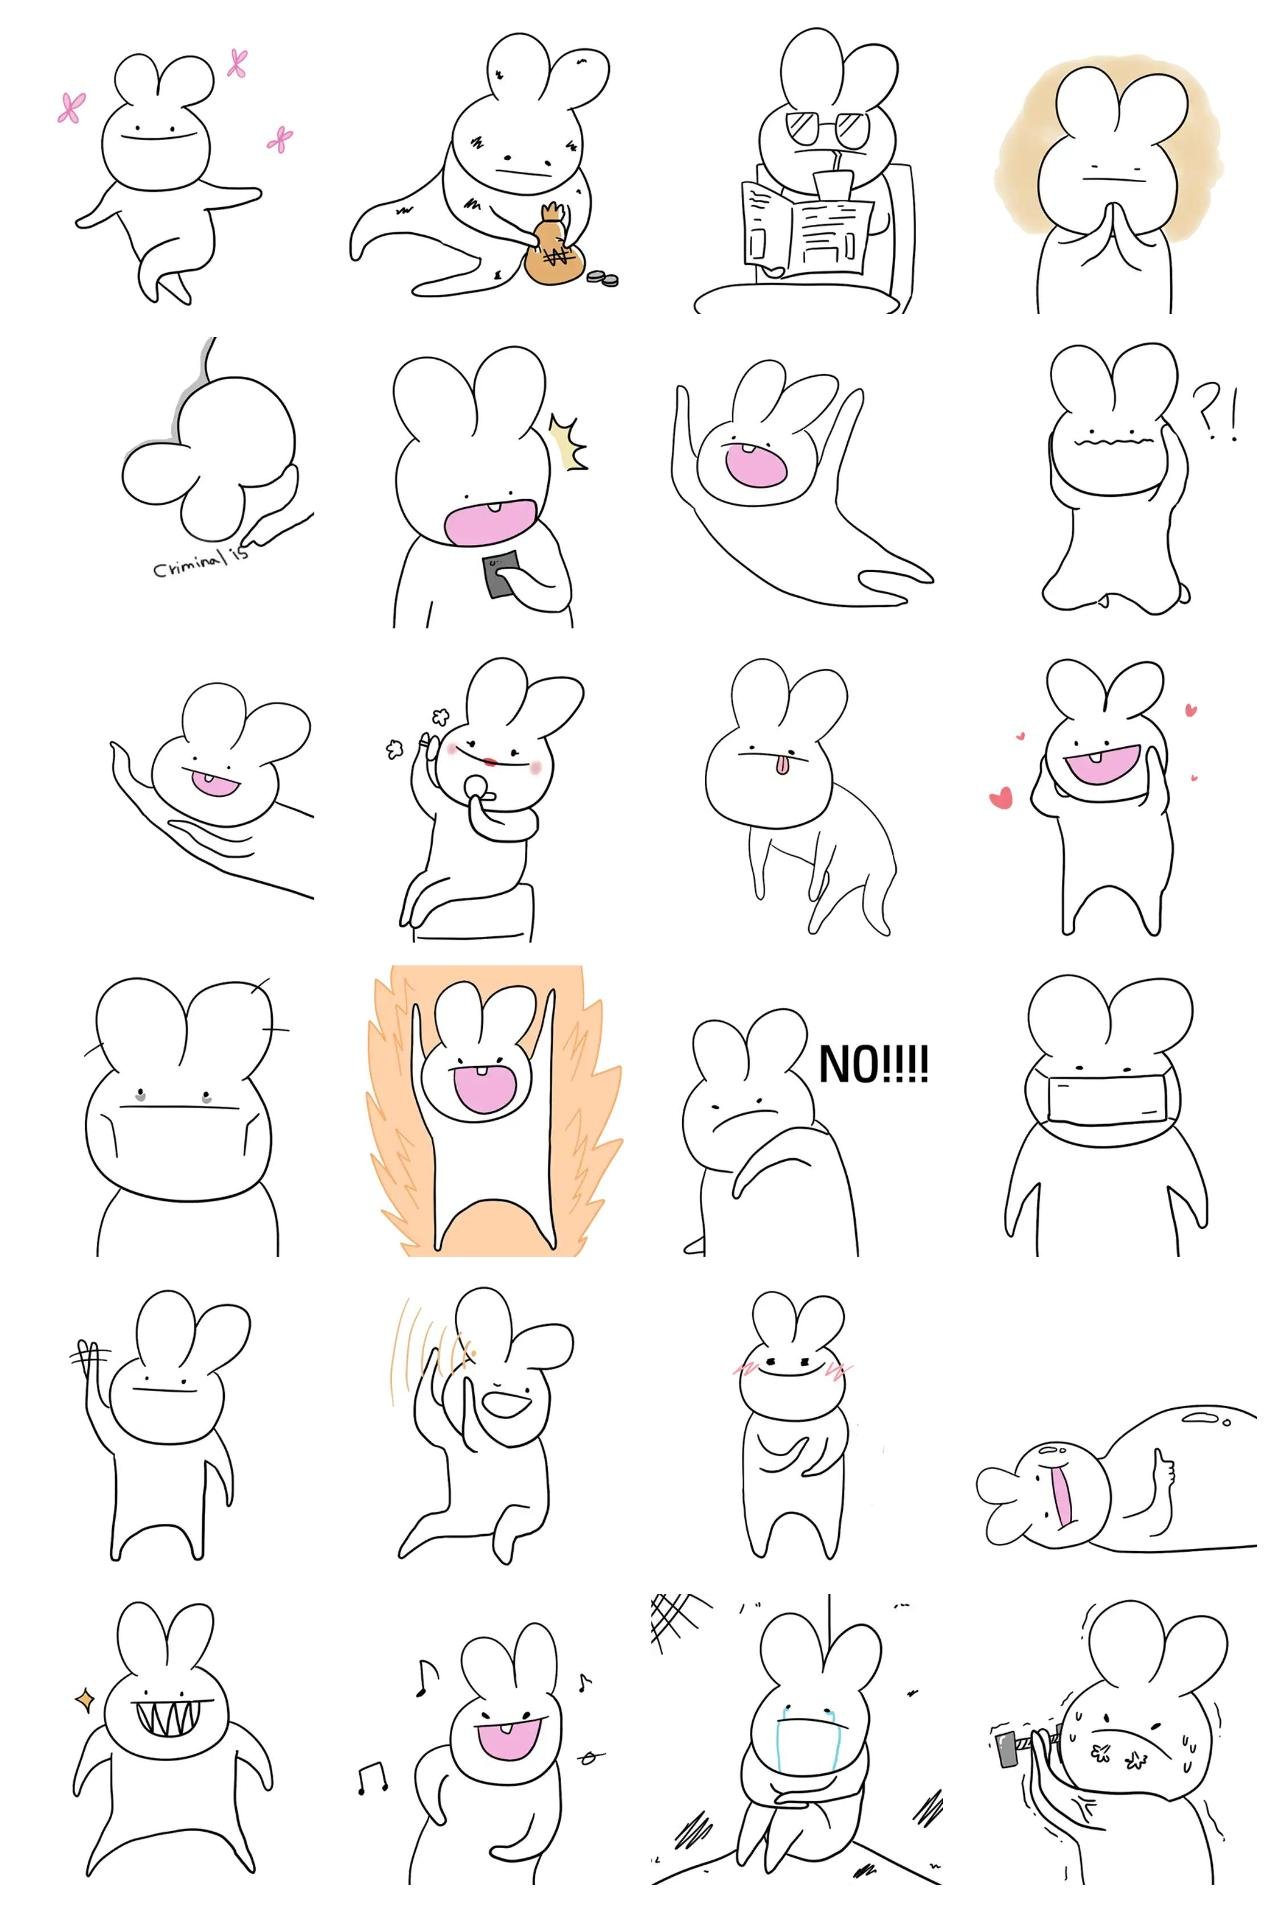 Round Ear Rabbit Animals sticker pack for Whatsapp, Telegram, Signal, and others chatting and message apps